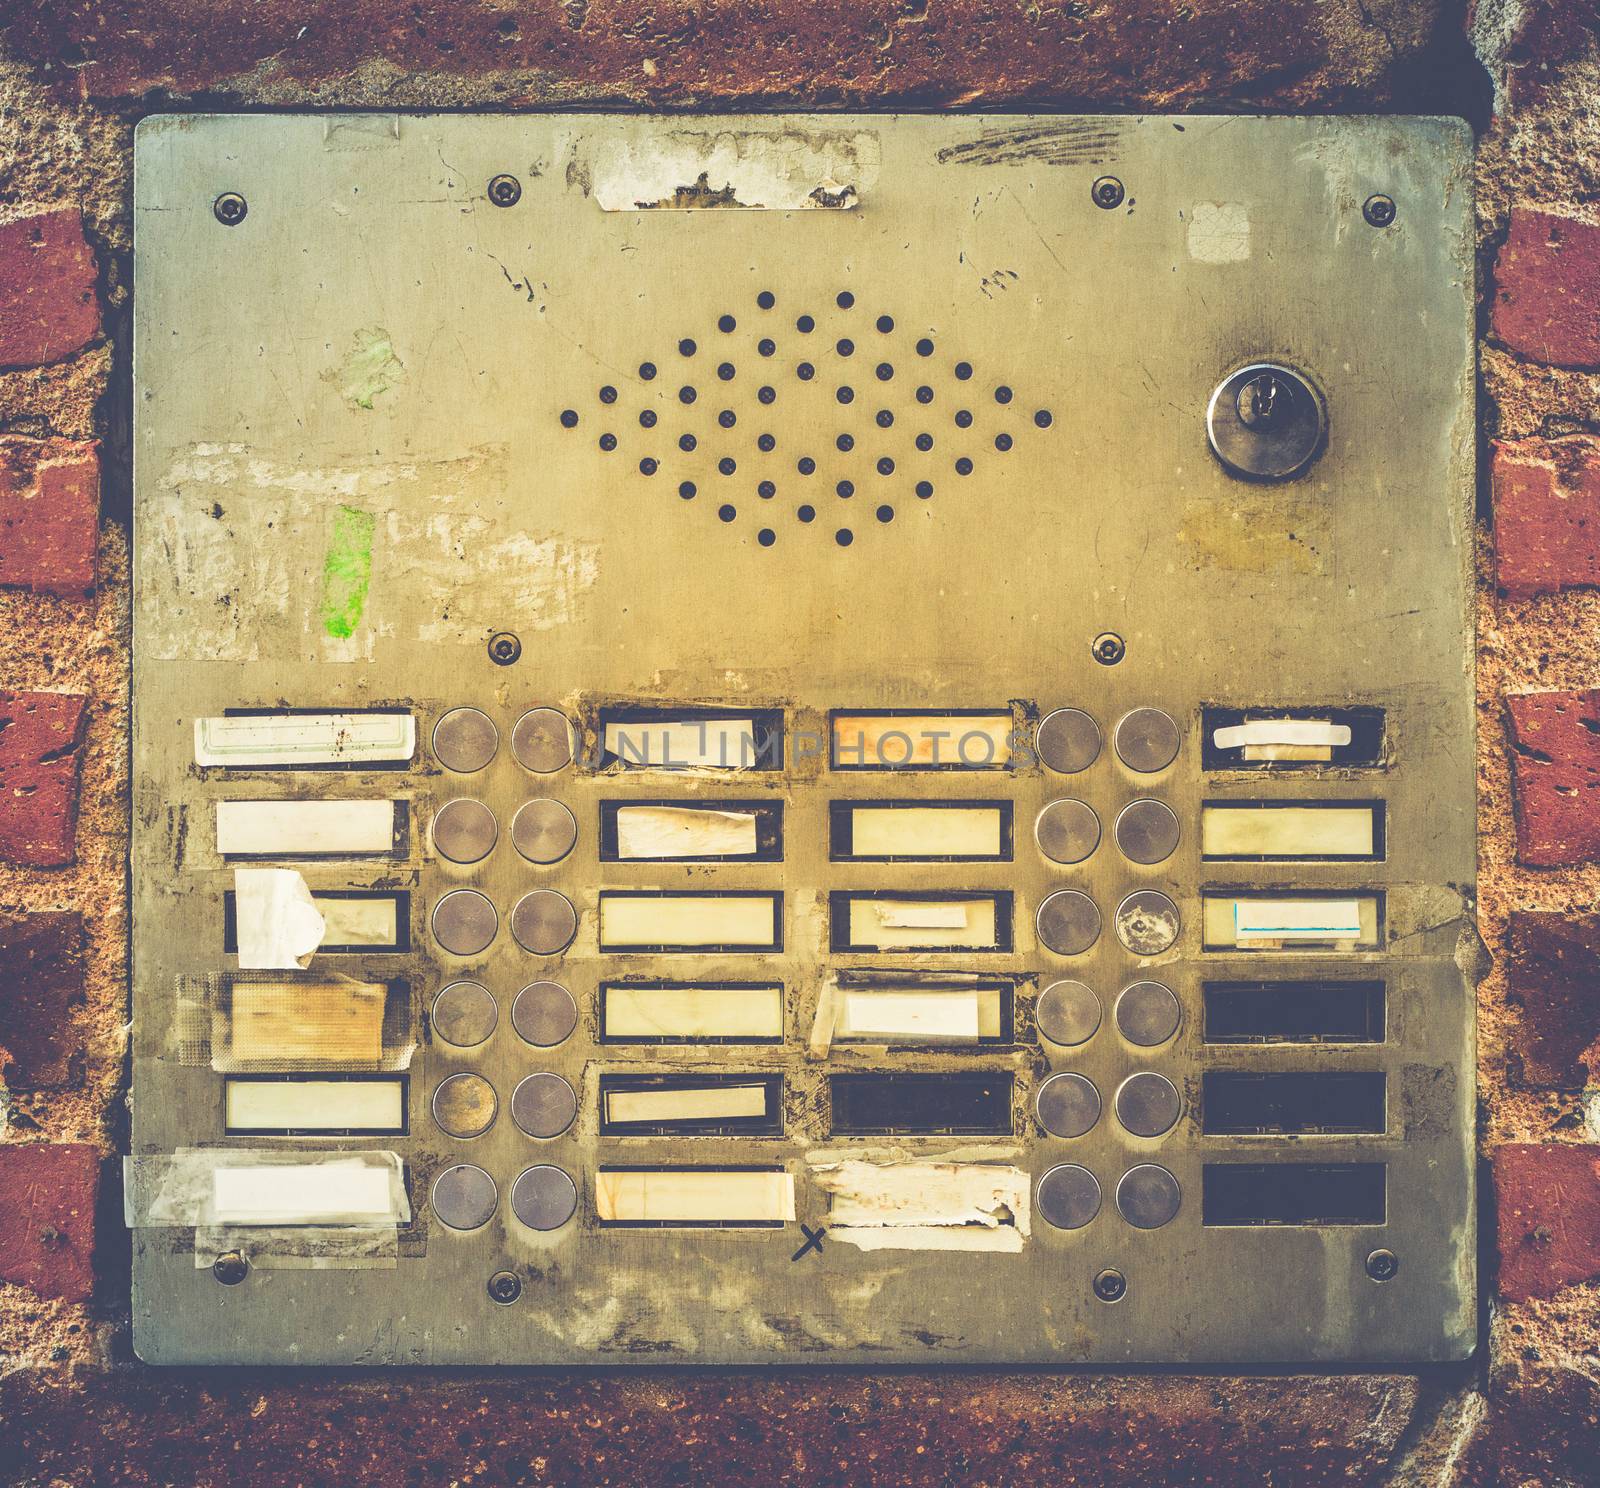 Retro Filter Photo Of Grungy Old Apartment Buzzer Or Intercome Buttons In Toulouse, France